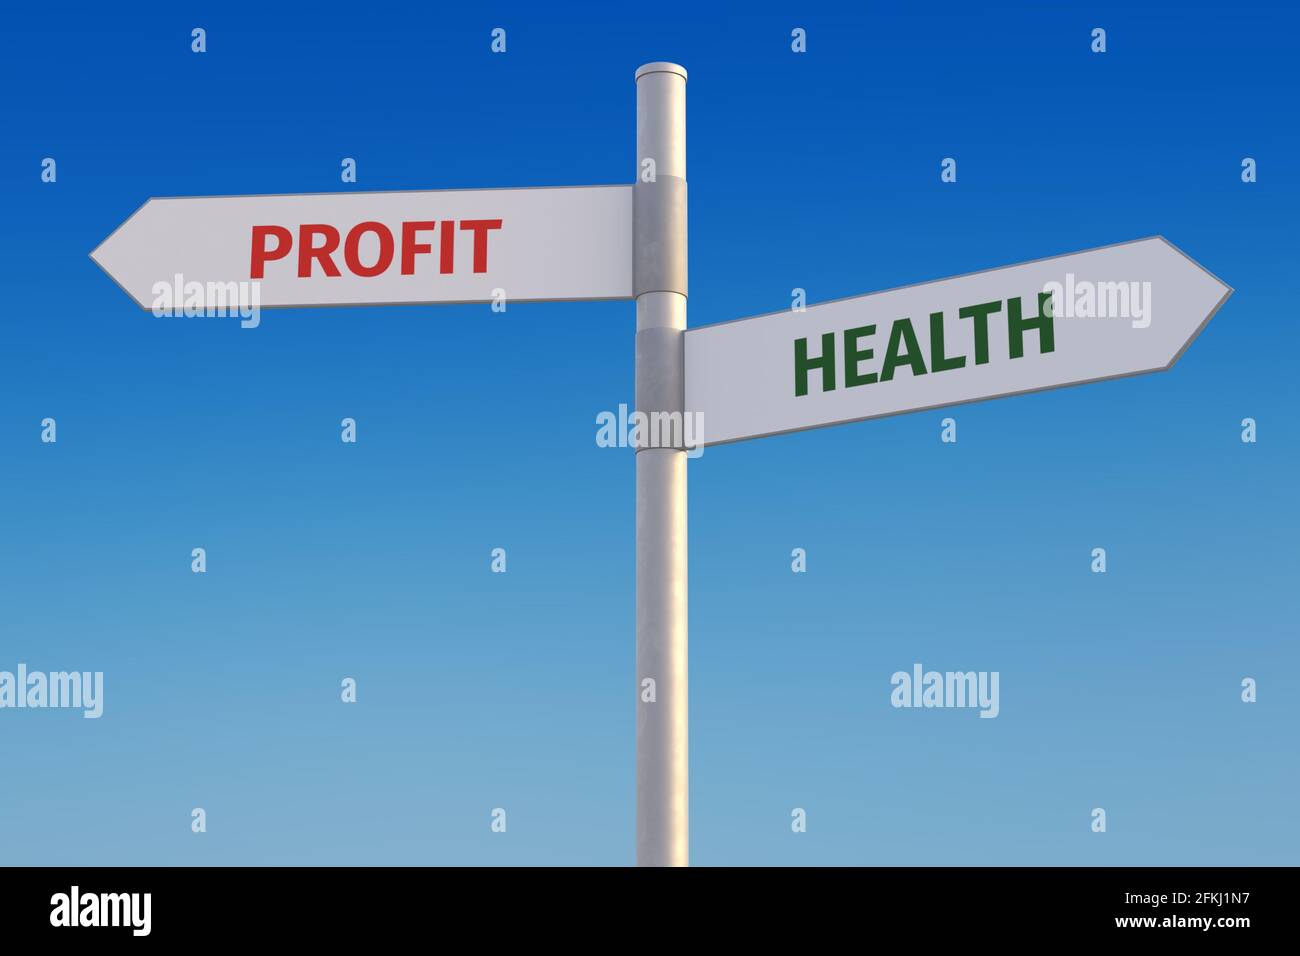 Profit before health concept. Two street signs pointing into opposite directions. Stock Photo